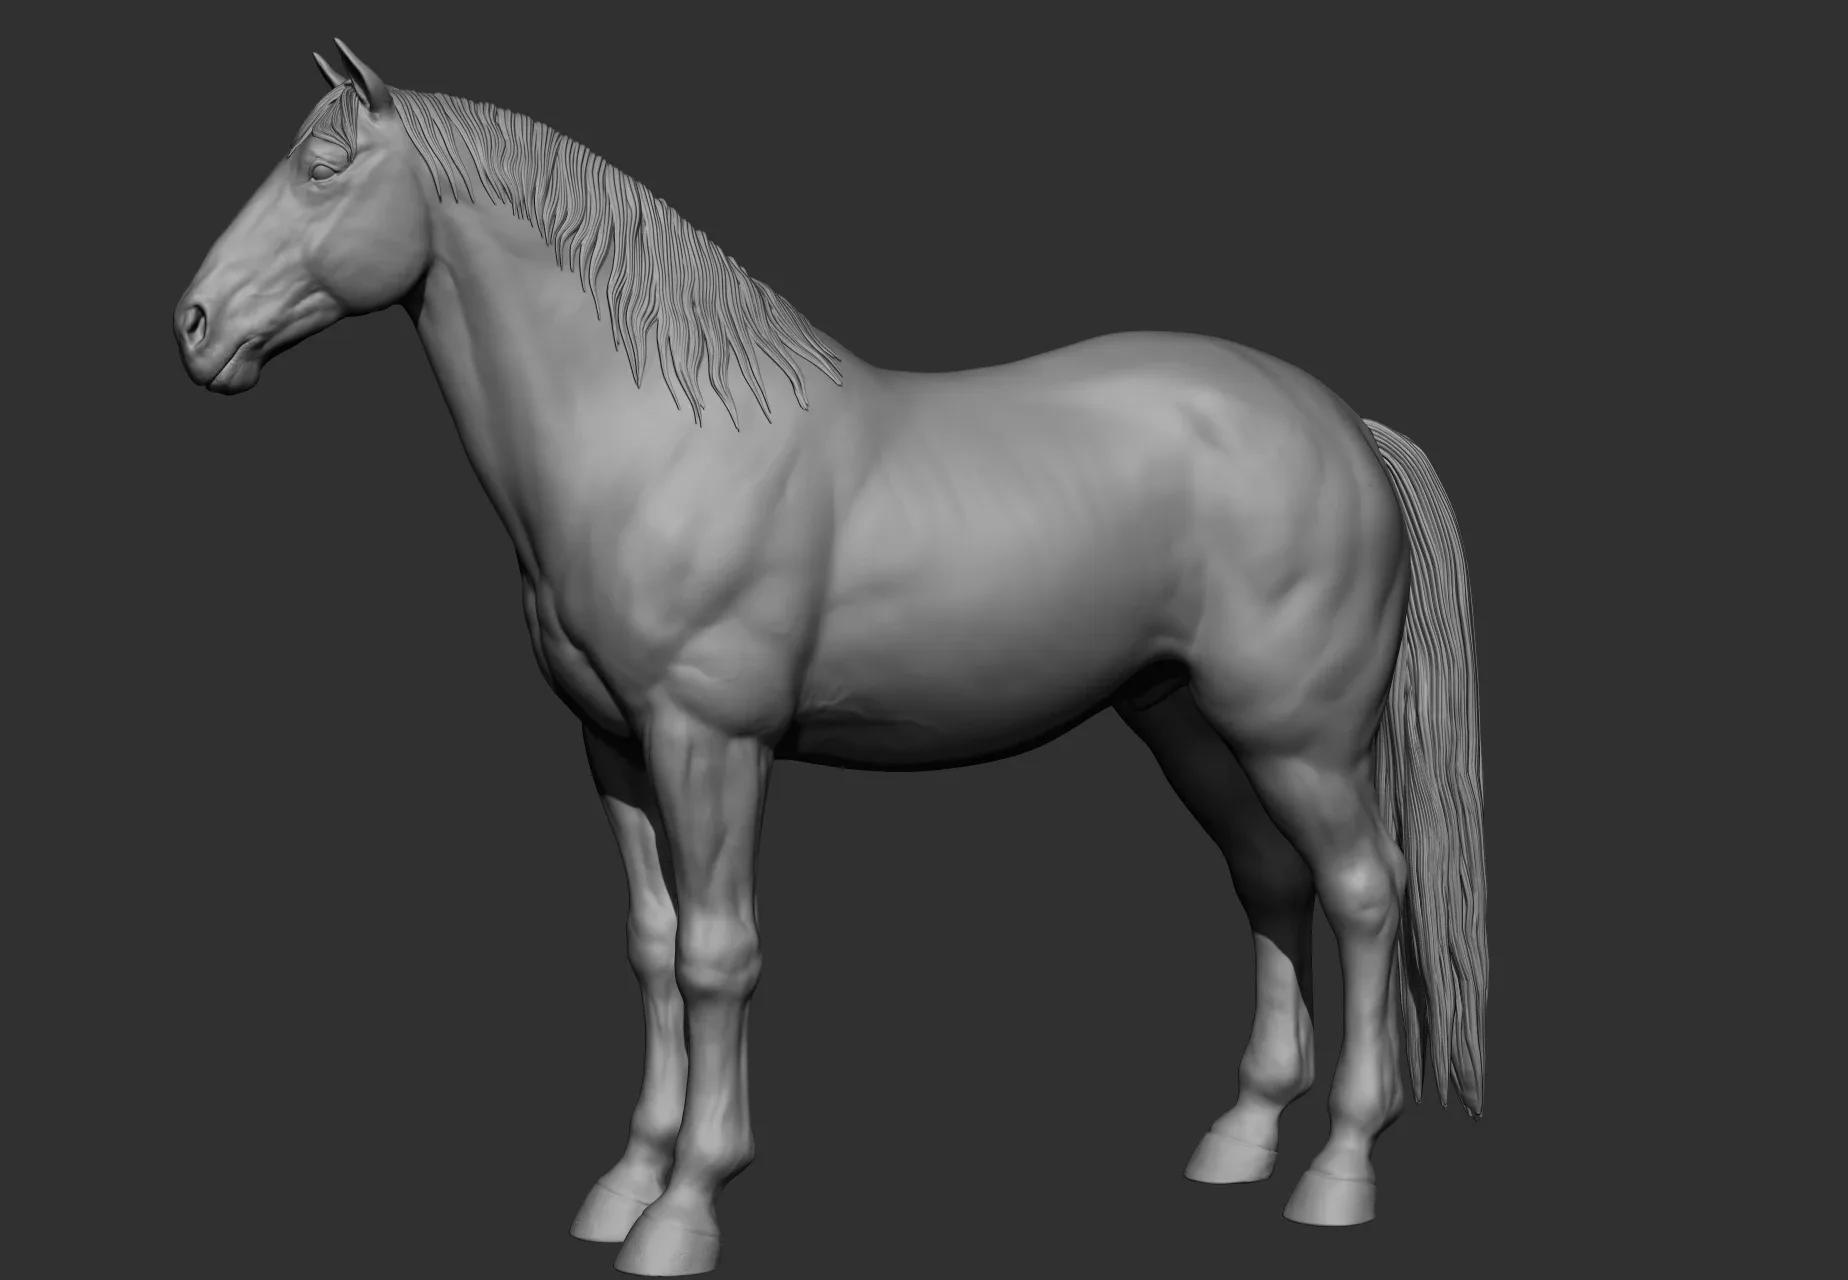 Horse Breeds Collection - 6 horses